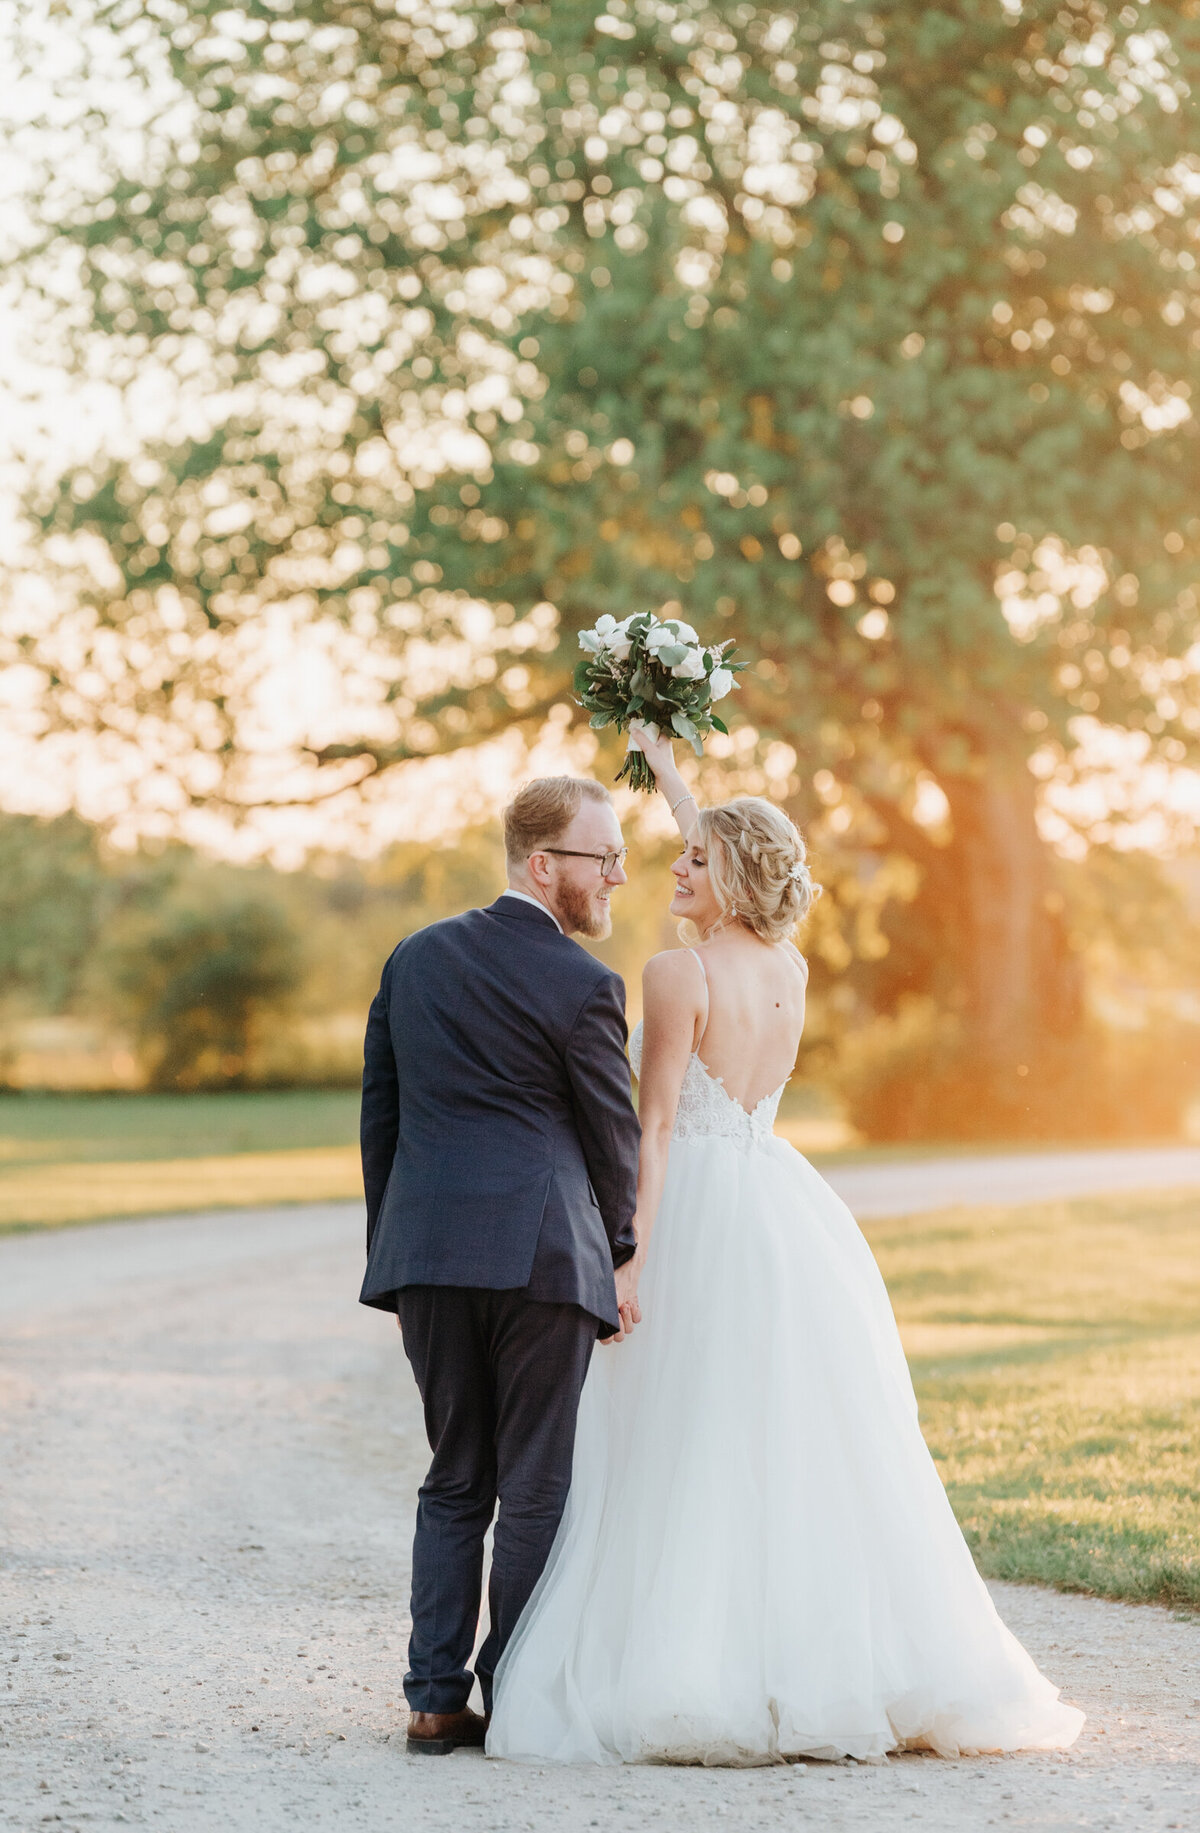 Bride and groom celebrate during sunset wedding portraits